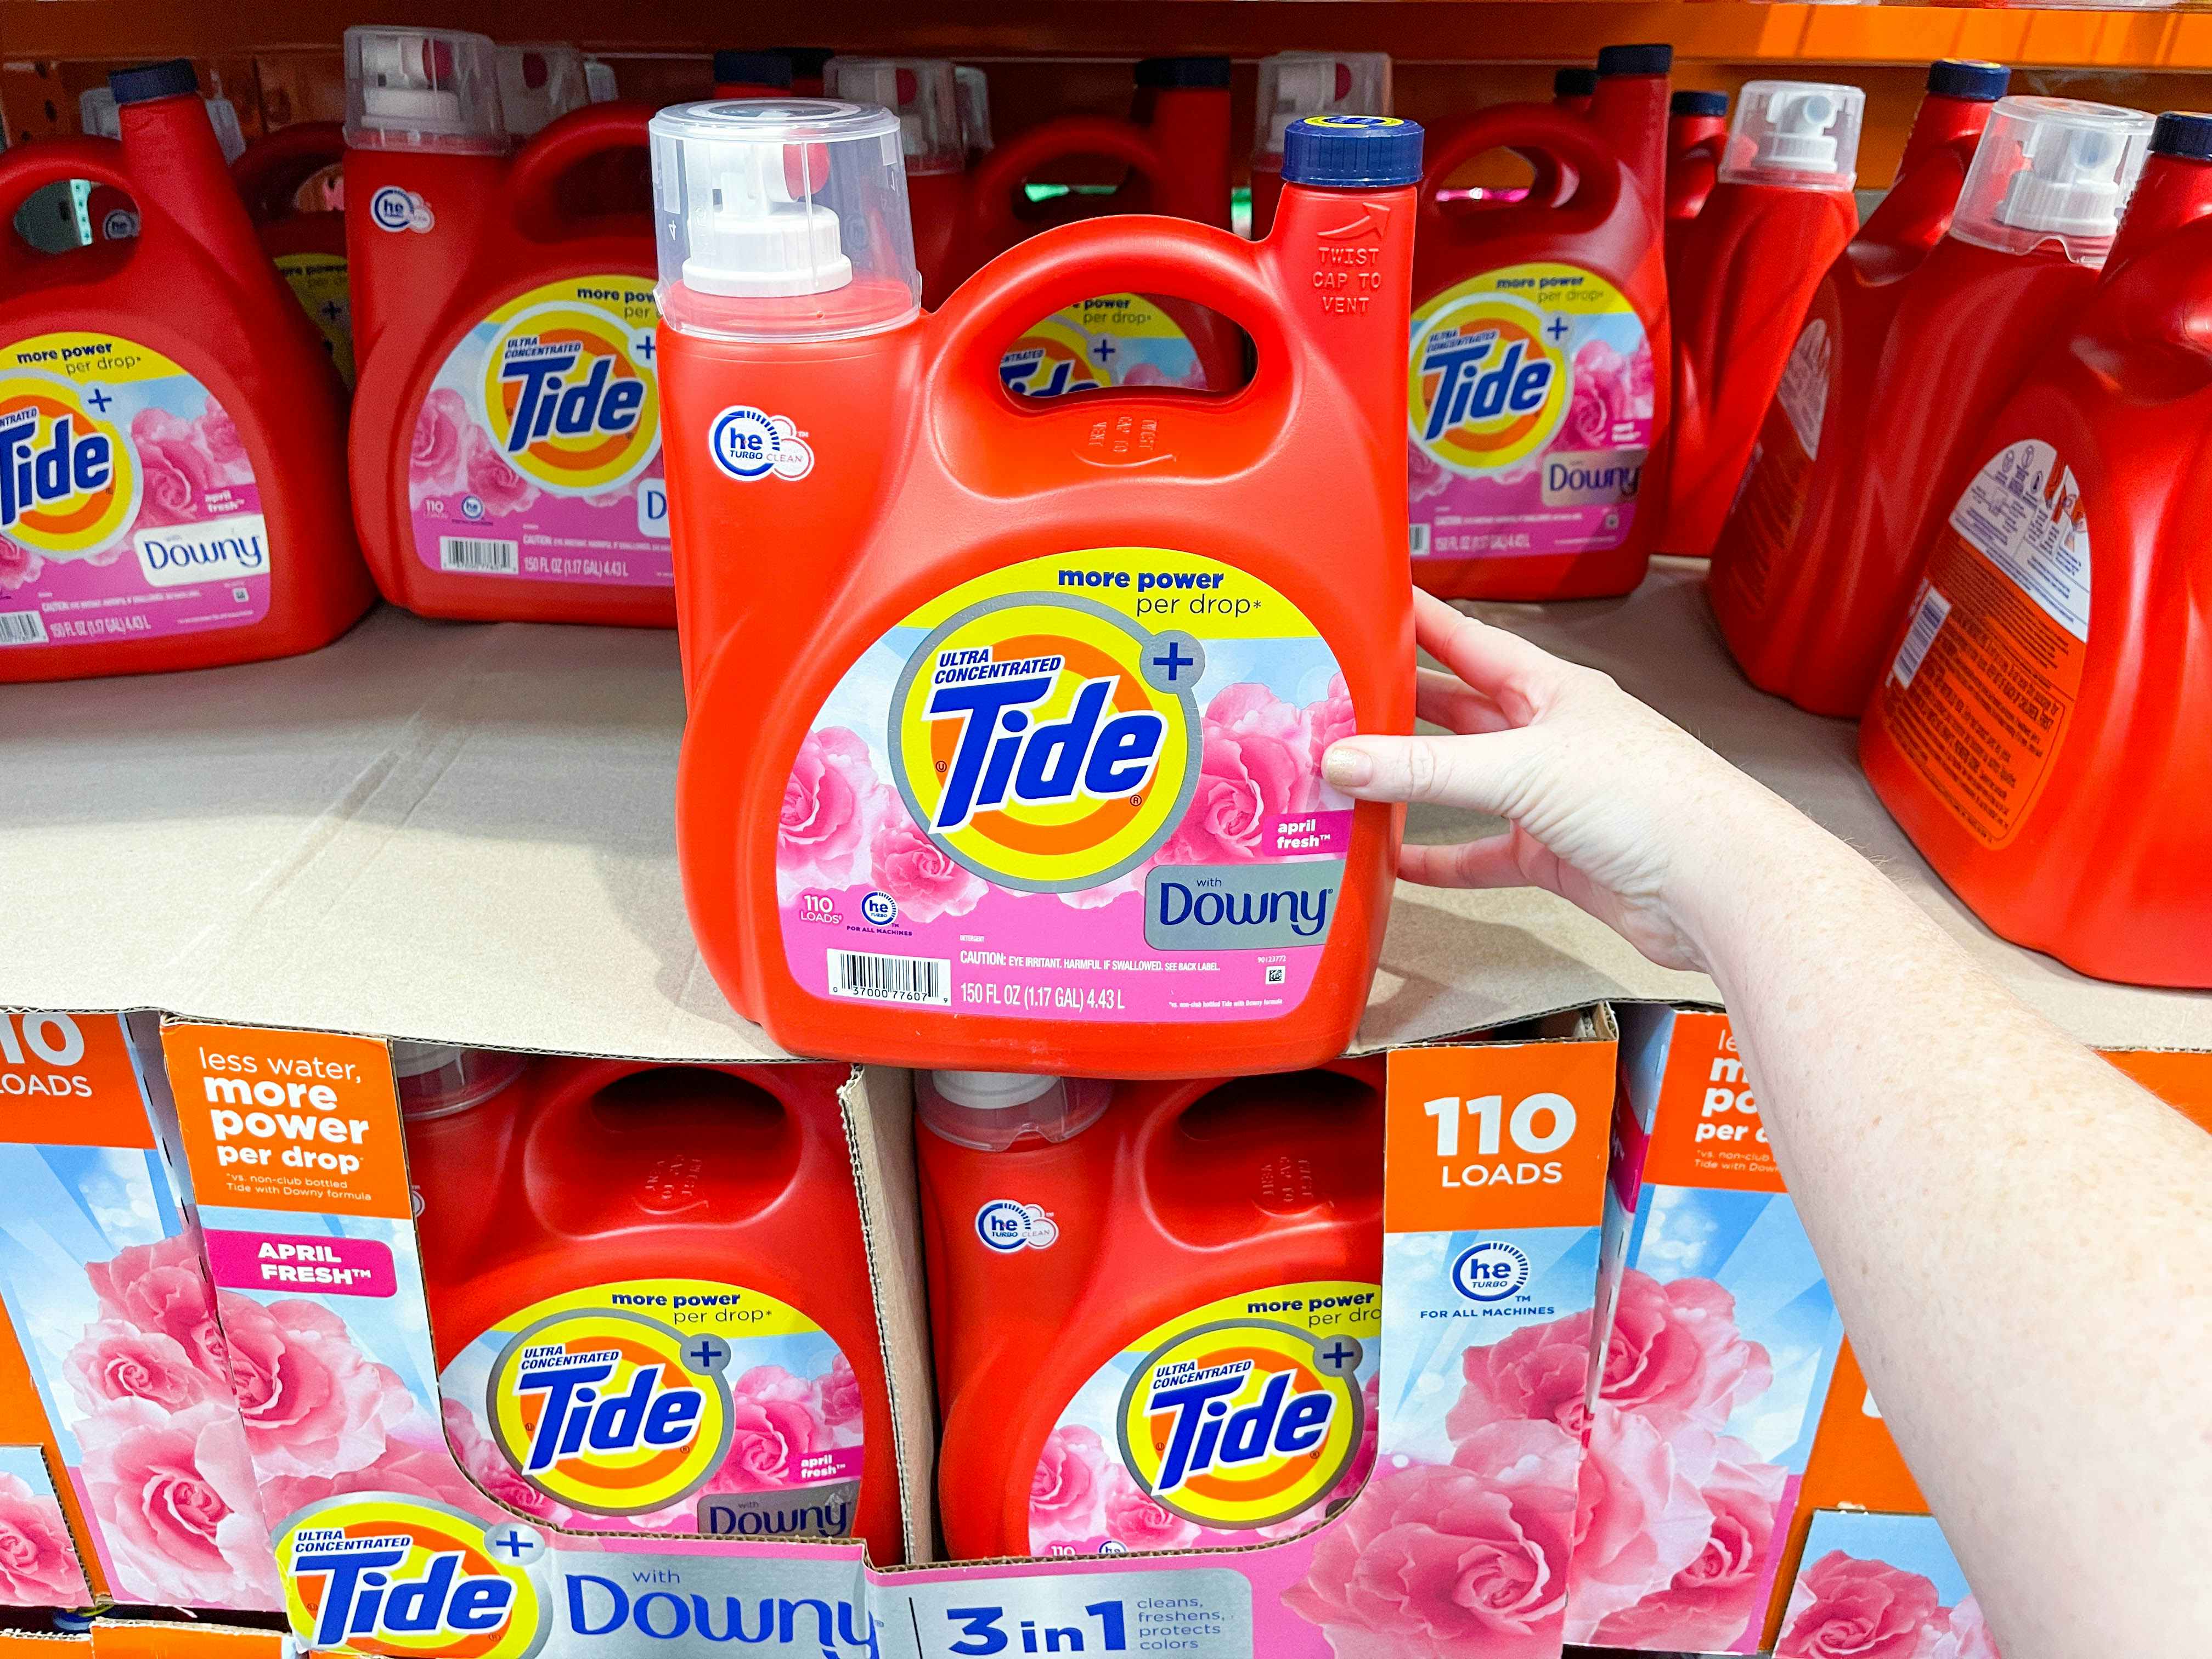 a large bottle of tide being held in store 